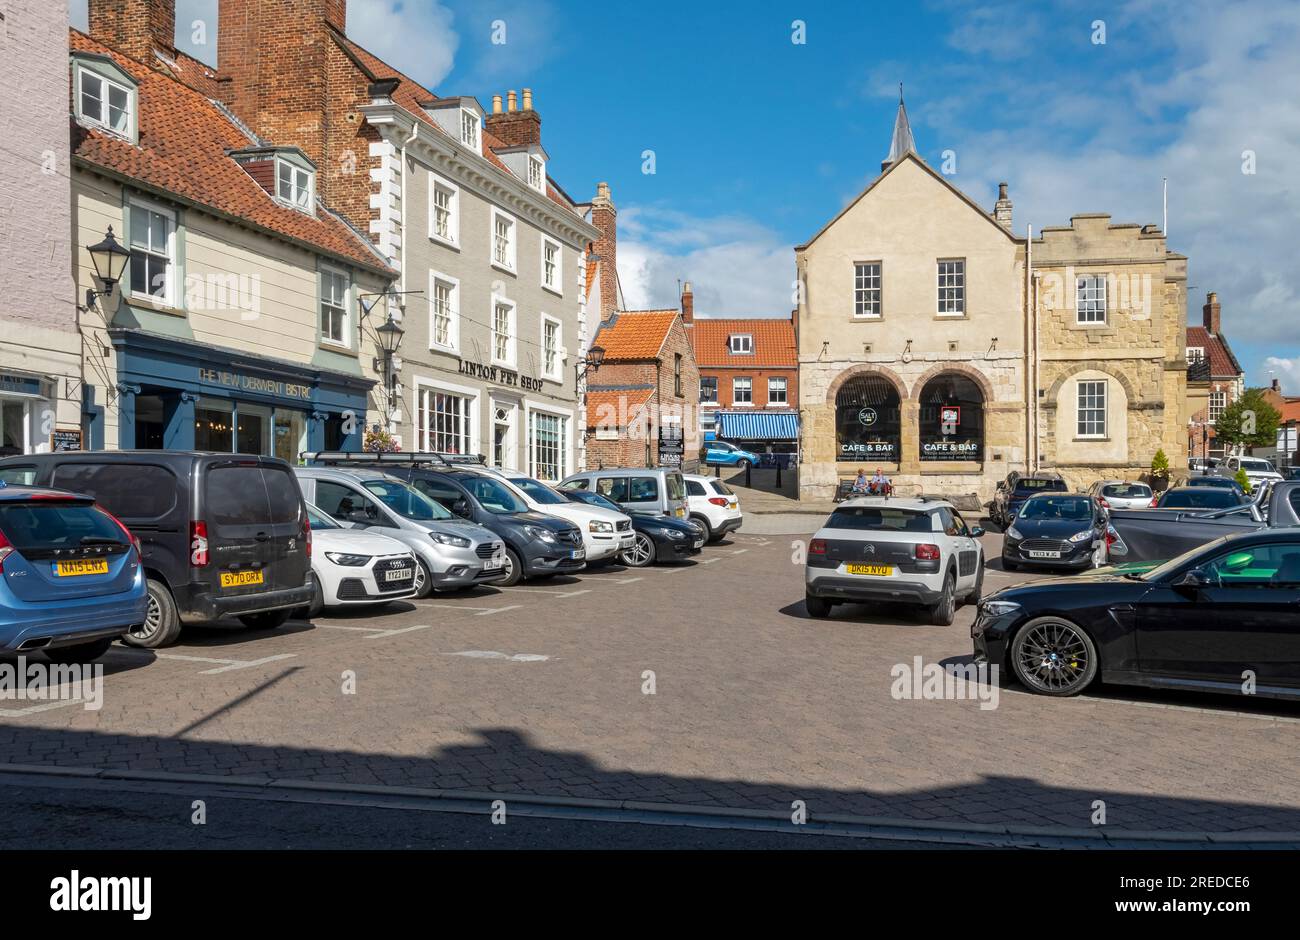 The old Town Hall and cars parked on the street in Market Place in summer Malton North Yorkshire England UK United Kingdom GB Great Britain Stock Photo